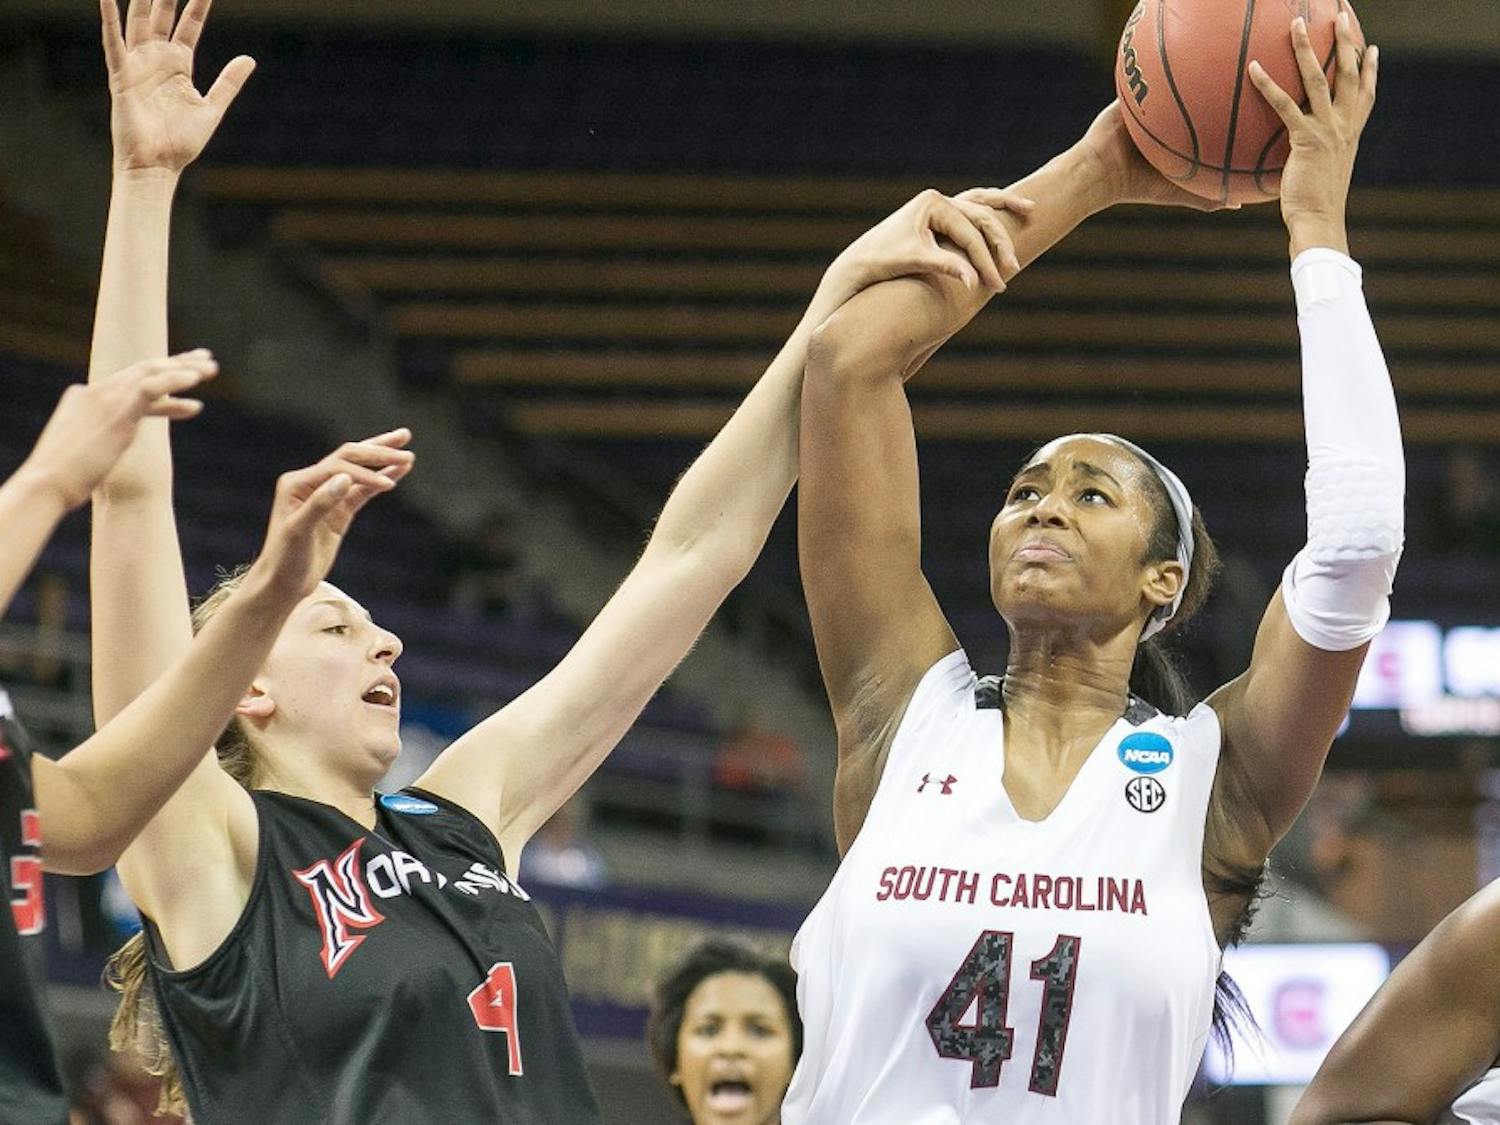 South Carolina&apos;s Alaina Coates (41) gets the rebound and attempts the put back in the second half, but gets fouled by CSU Northridge&apos;s Camille Mahlknecht during the first round of the women&apos;s NCAA Tournament in Seattle on Sunday, March 23, 2014. (Dean Rutz/Seattle Times/MCT)